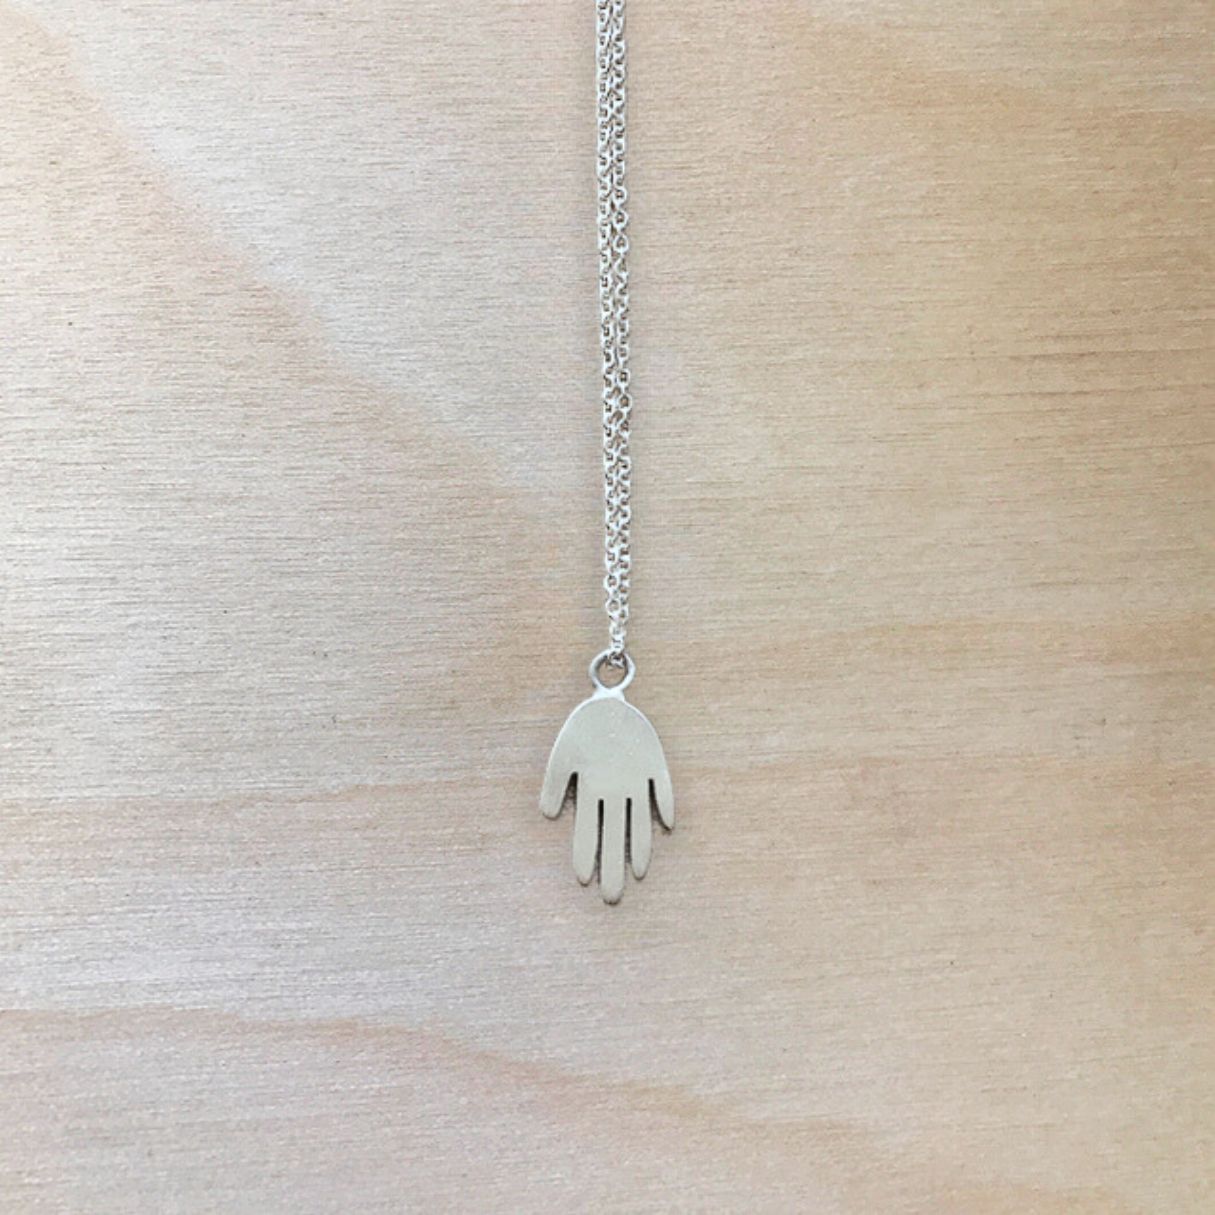 Hand Necklace in Sterling Silver